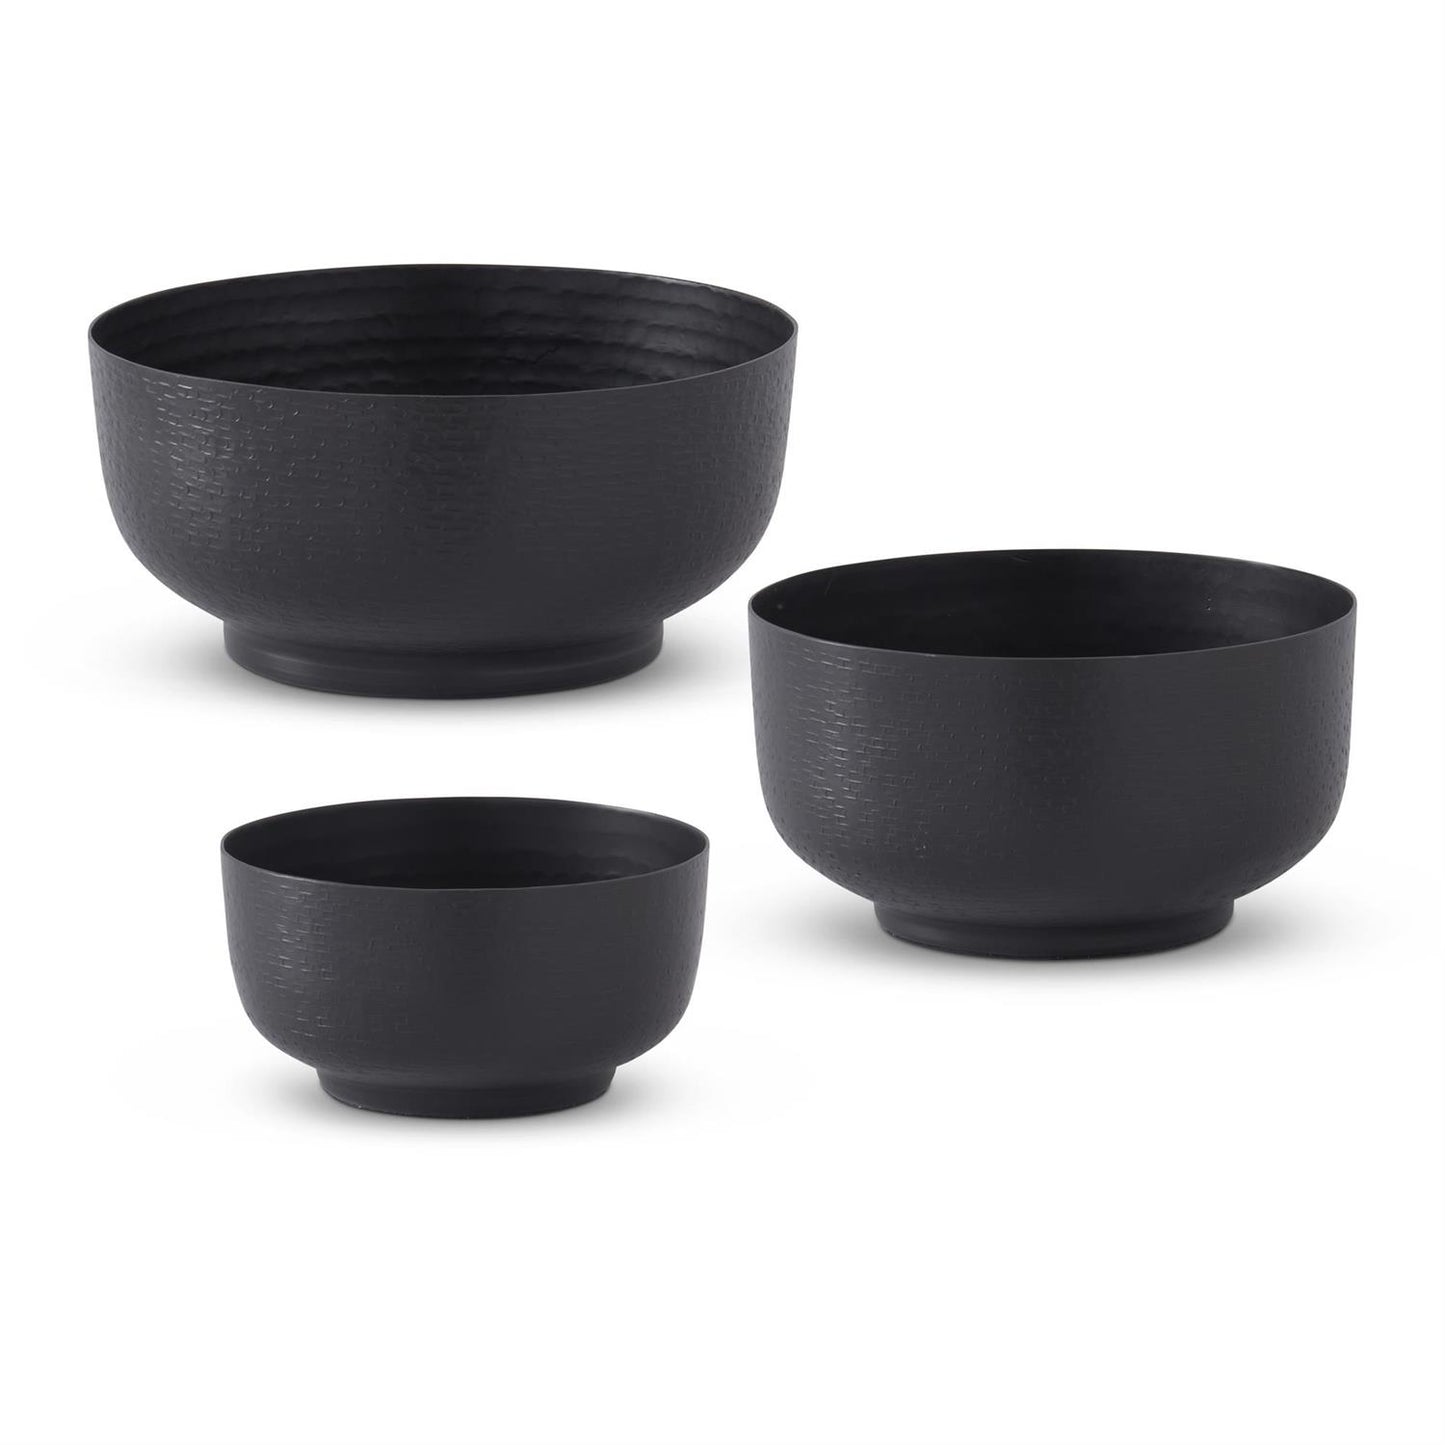 Textured Black Footed Bowls, Set of 3